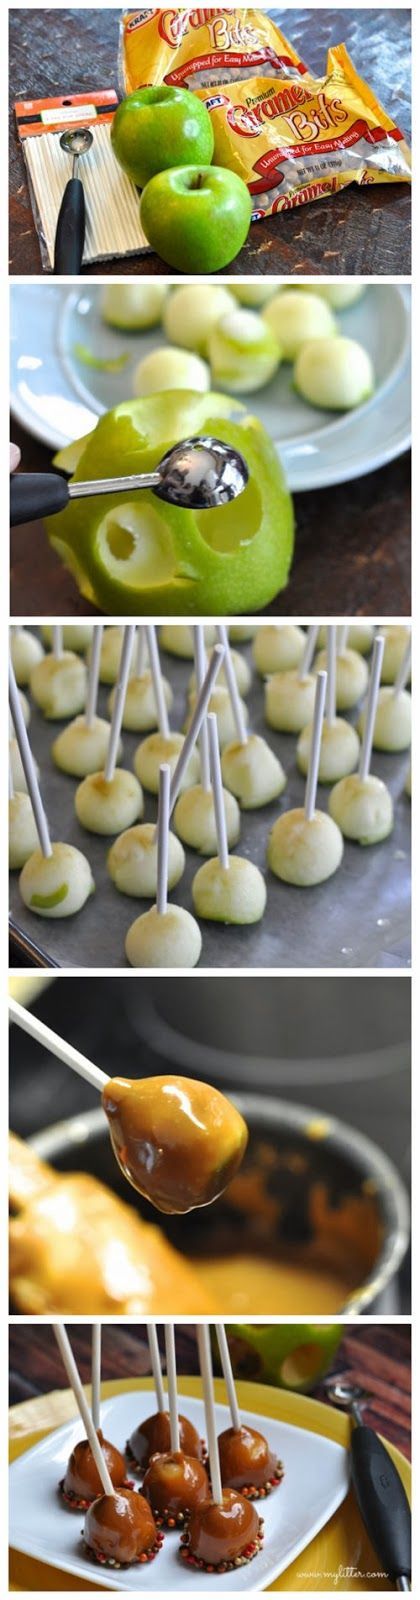 Its fall! Make these mini Caramel Apples for the game tomorrow to celebrate both the Redskins and the changing season.